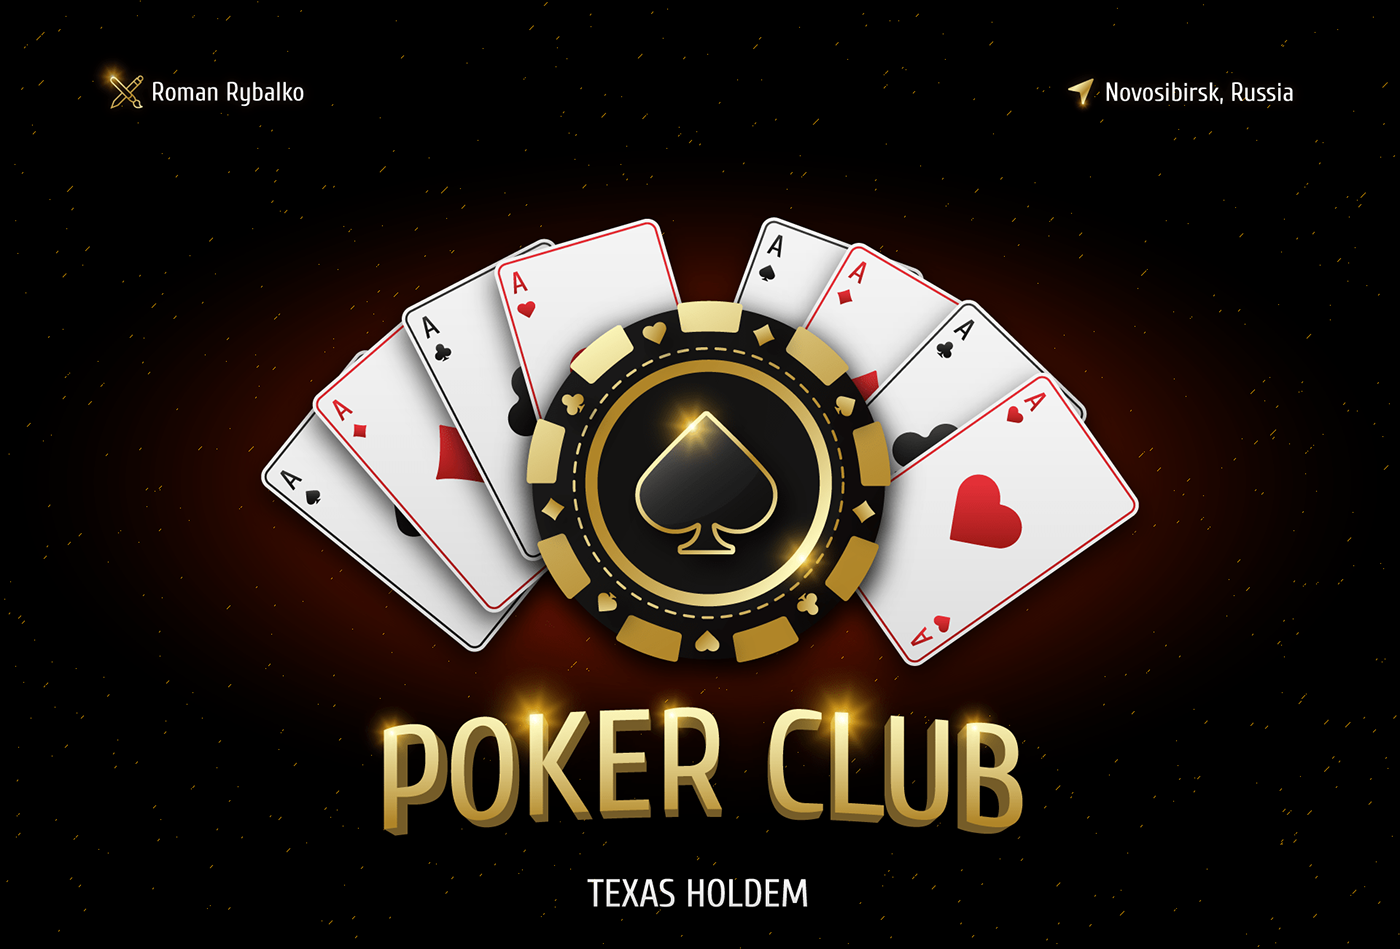 Poker tournament banner. Poker logo with playing card suit chip.